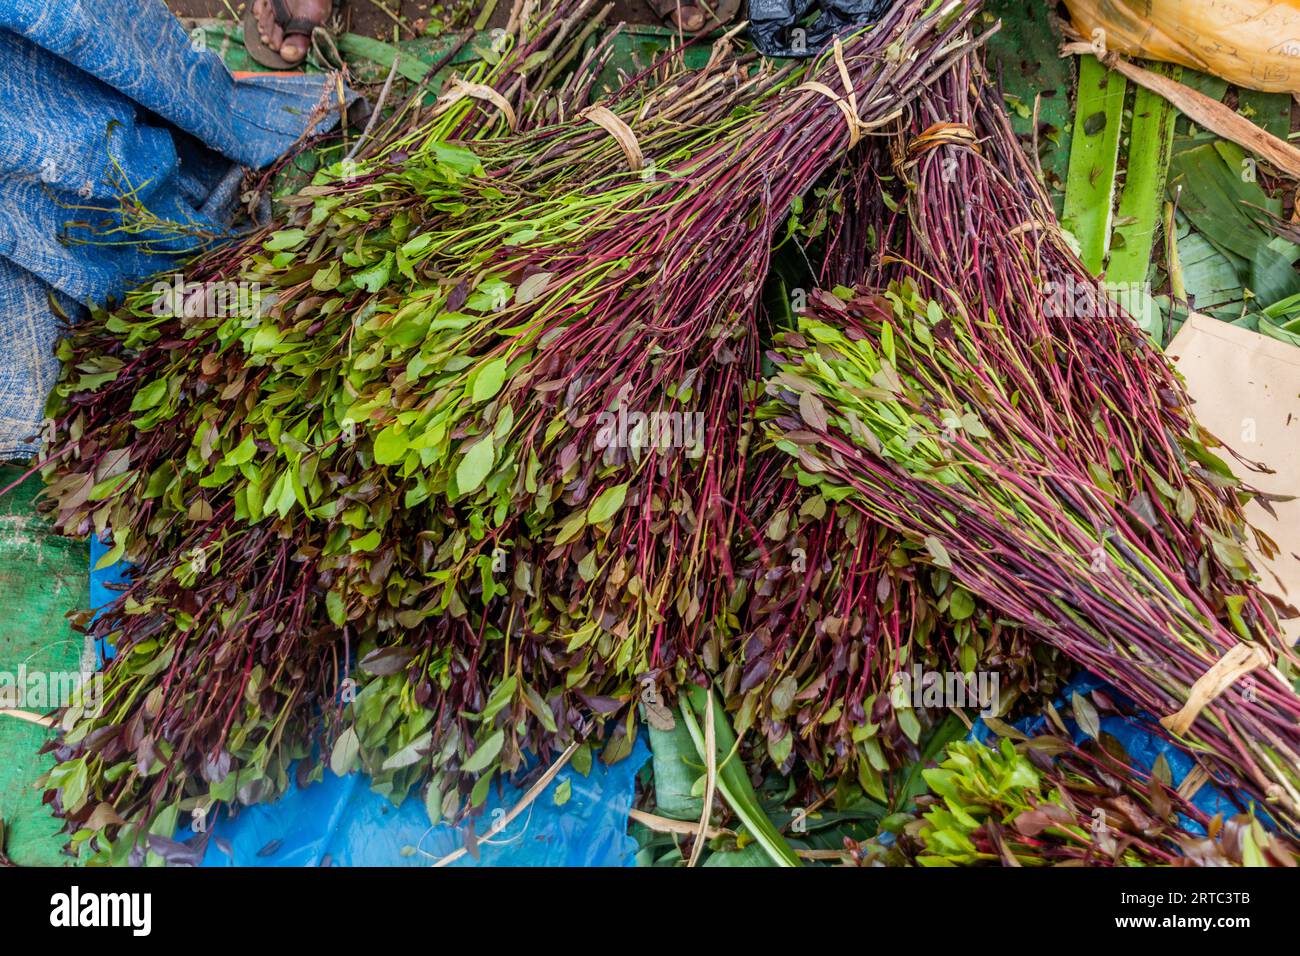 Detail of khat (qat) branches in Ethiopia Stock Photo